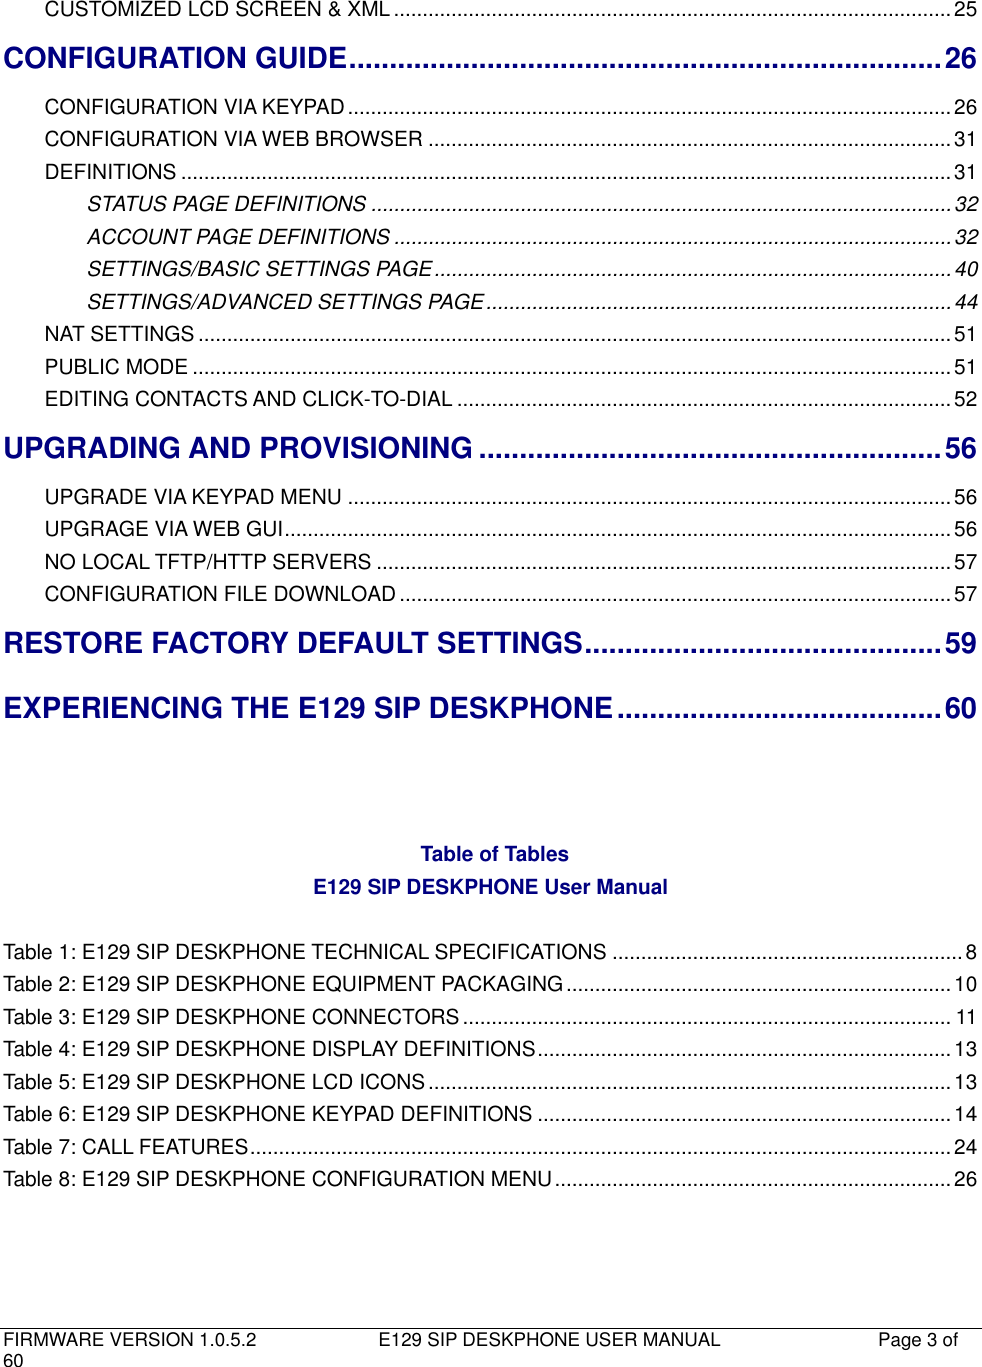   FIRMWARE VERSION 1.0.5.2                          E129 SIP DESKPHONE USER MANUAL           Page 3 of 60                                   CUSTOMIZED LCD SCREEN &amp; XML ................................................................................................. 25 CONFIGURATION GUIDE ......................................................................... 26 CONFIGURATION VIA KEYPAD ......................................................................................................... 26 CONFIGURATION VIA WEB BROWSER ........................................................................................... 31 DEFINITIONS ...................................................................................................................................... 31 STATUS PAGE DEFINITIONS ..................................................................................................... 32 ACCOUNT PAGE DEFINITIONS ................................................................................................. 32 SETTINGS/BASIC SETTINGS PAGE .......................................................................................... 40 SETTINGS/ADVANCED SETTINGS PAGE ................................................................................. 44 NAT SETTINGS ................................................................................................................................... 51 PUBLIC MODE .................................................................................................................................... 51 EDITING CONTACTS AND CLICK-TO-DIAL ...................................................................................... 52 UPGRADING AND PROVISIONING ......................................................... 56 UPGRADE VIA KEYPAD MENU ......................................................................................................... 56 UPGRAGE VIA WEB GUI .................................................................................................................... 56 NO LOCAL TFTP/HTTP SERVERS .................................................................................................... 57 CONFIGURATION FILE DOWNLOAD ................................................................................................ 57 RESTORE FACTORY DEFAULT SETTINGS ............................................ 59 EXPERIENCING THE E129 SIP DESKPHONE ........................................ 60     Table of Tables E129 SIP DESKPHONE User Manual  Table 1: E129 SIP DESKPHONE TECHNICAL SPECIFICATIONS ............................................................. 8 Table 2: E129 SIP DESKPHONE EQUIPMENT PACKAGING ................................................................... 10 Table 3: E129 SIP DESKPHONE CONNECTORS ..................................................................................... 11 Table 4: E129 SIP DESKPHONE DISPLAY DEFINITIONS ........................................................................ 13 Table 5: E129 SIP DESKPHONE LCD ICONS ........................................................................................... 13 Table 6: E129 SIP DESKPHONE KEYPAD DEFINITIONS ........................................................................ 14 Table 7: CALL FEATURES .......................................................................................................................... 24 Table 8: E129 SIP DESKPHONE CONFIGURATION MENU ..................................................................... 26    